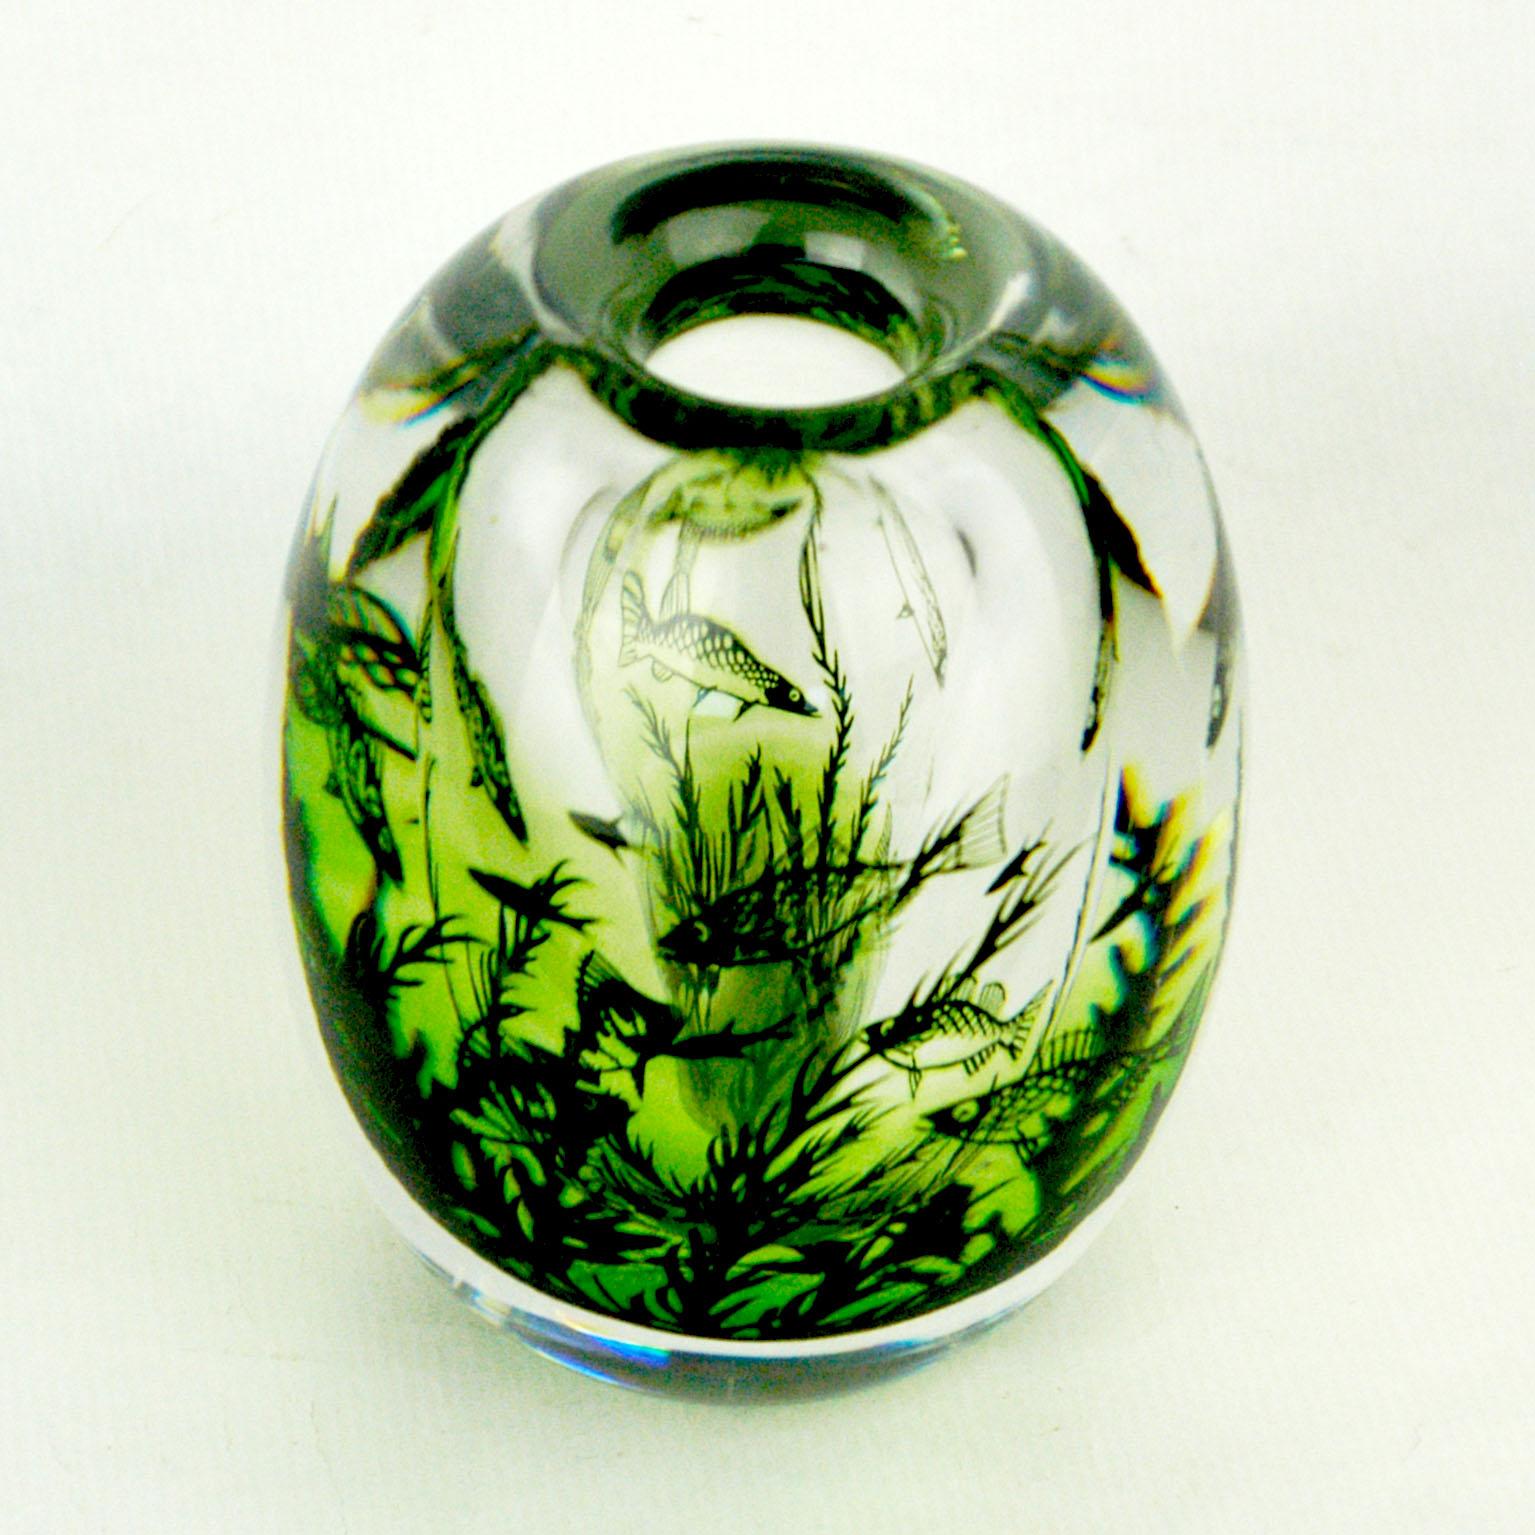 Amazing Scandinavian glass vase- colorless glass internally decorated with green swimming fish and sea weed.
At the bottom engraved Orrefors, Graal no 7188, Hald. Very good condition without damage.